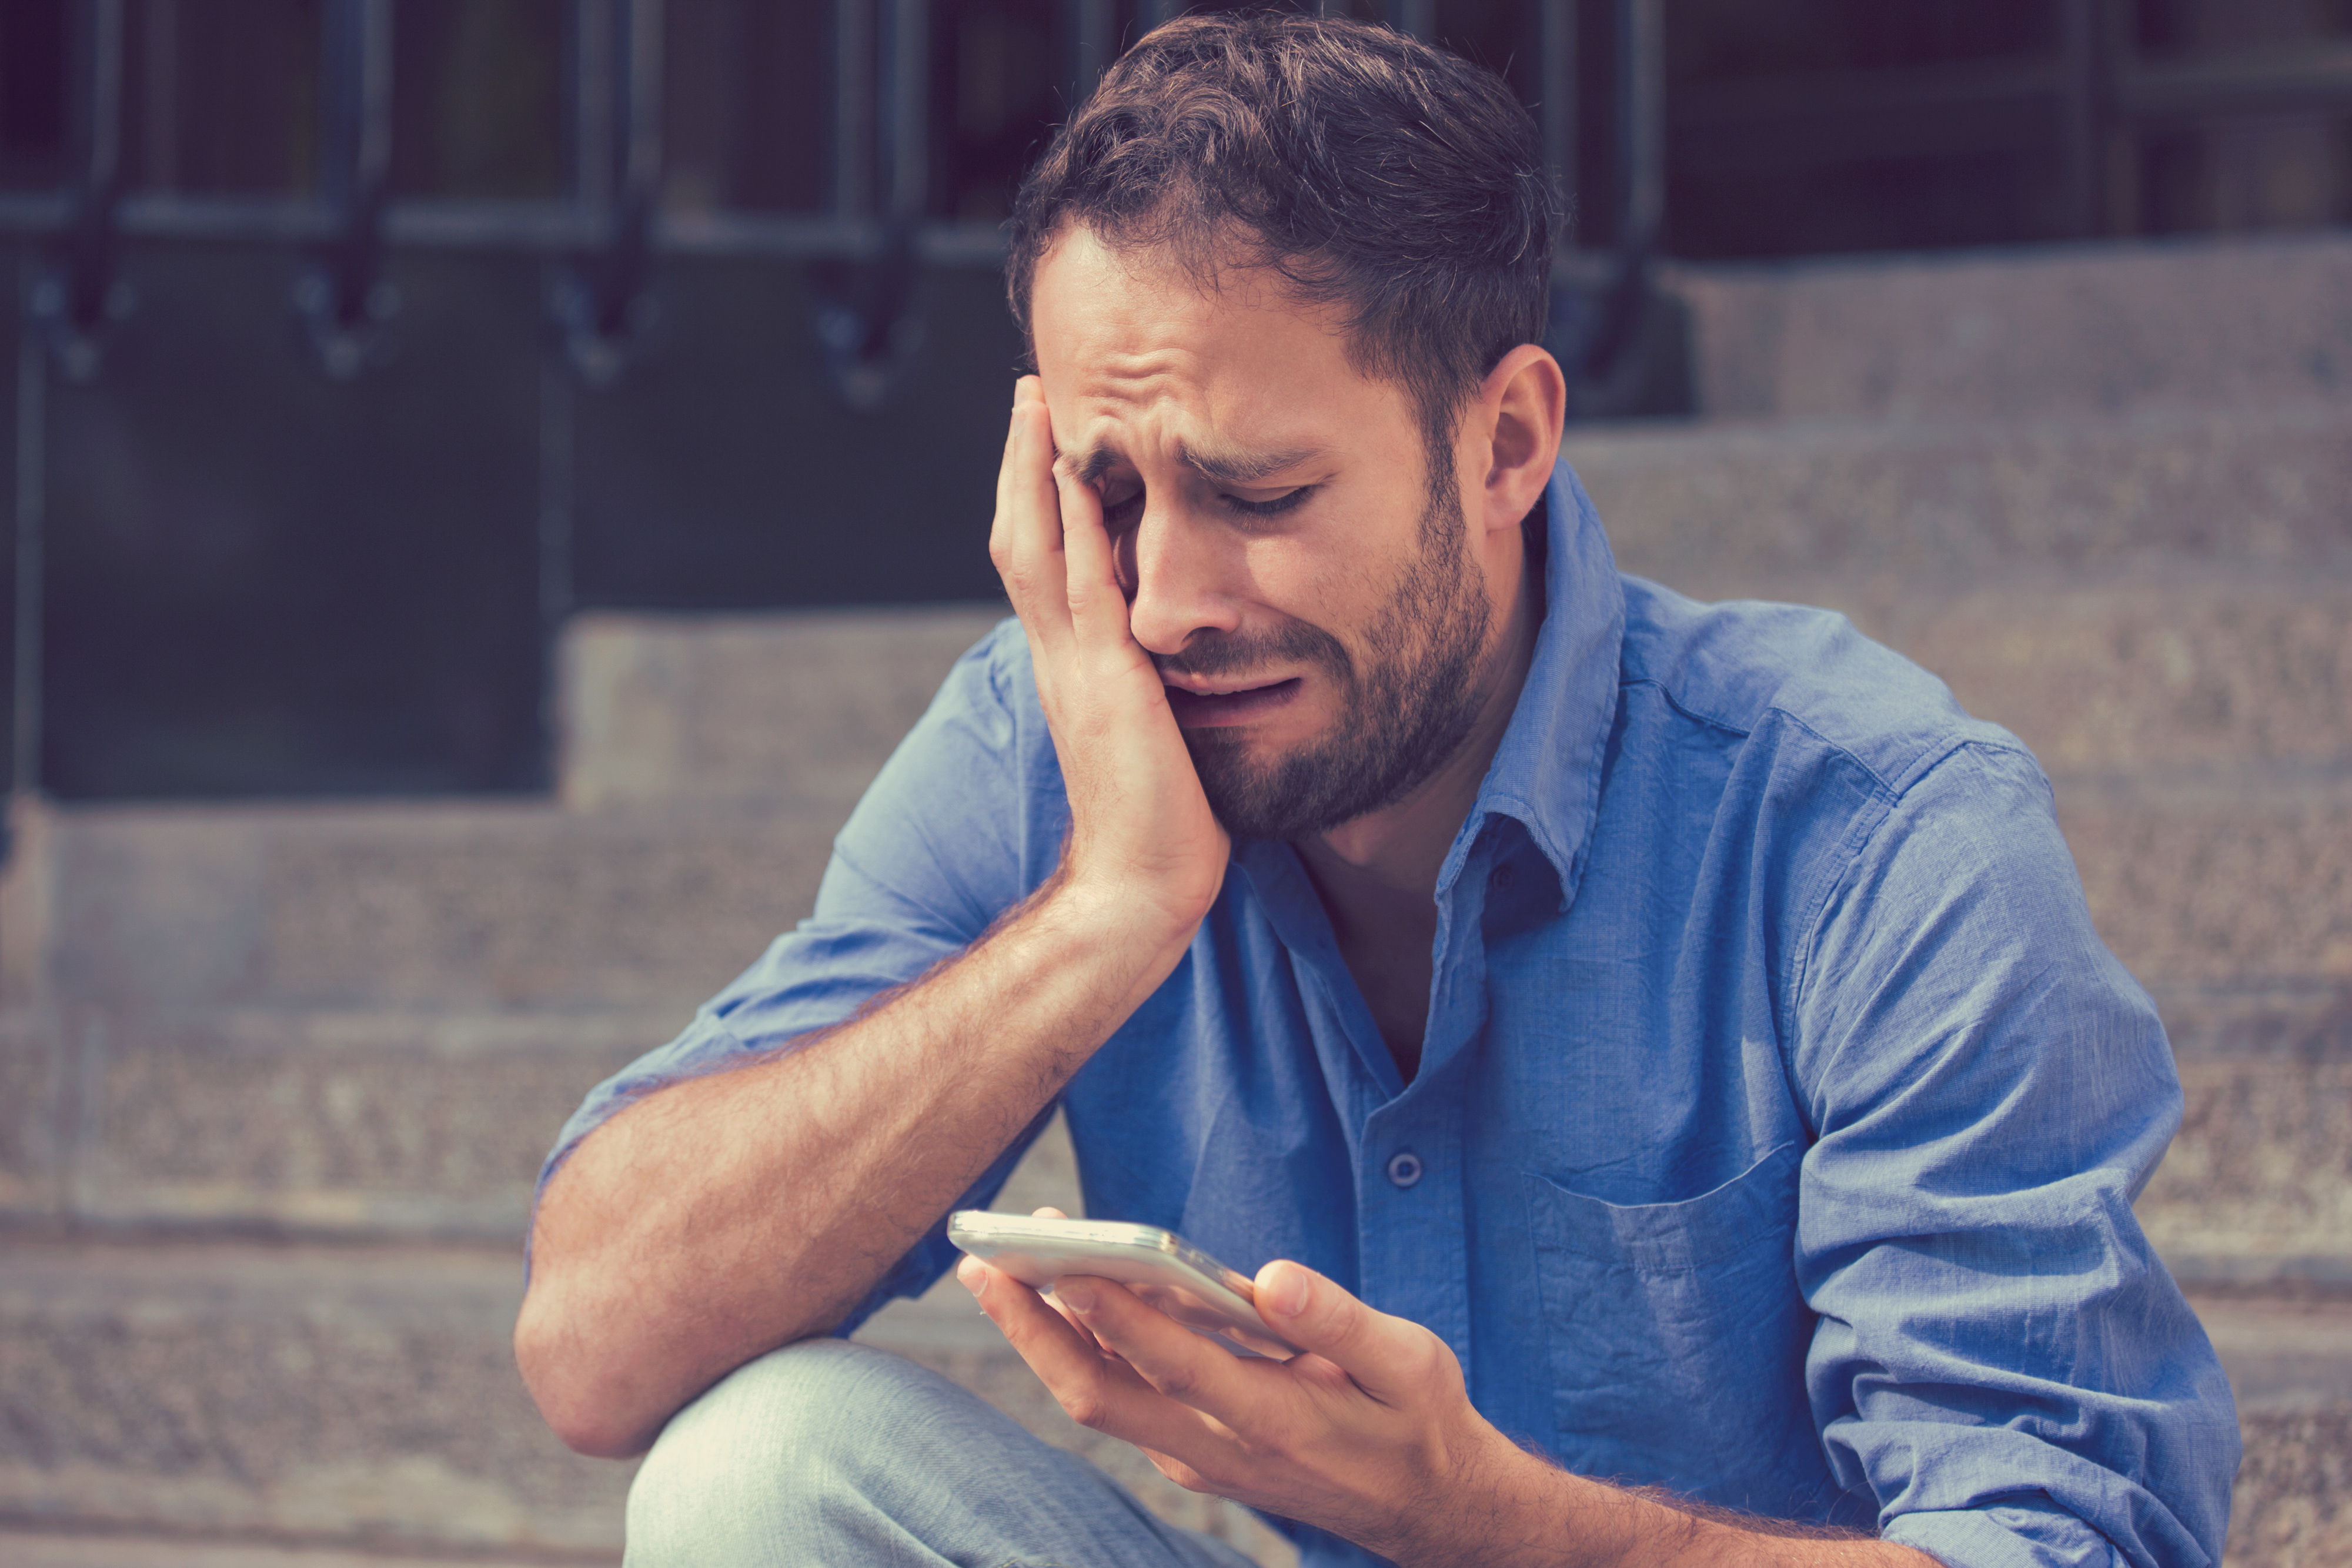 A man sobs while staring at his mobile phone | Source: Shutterstock